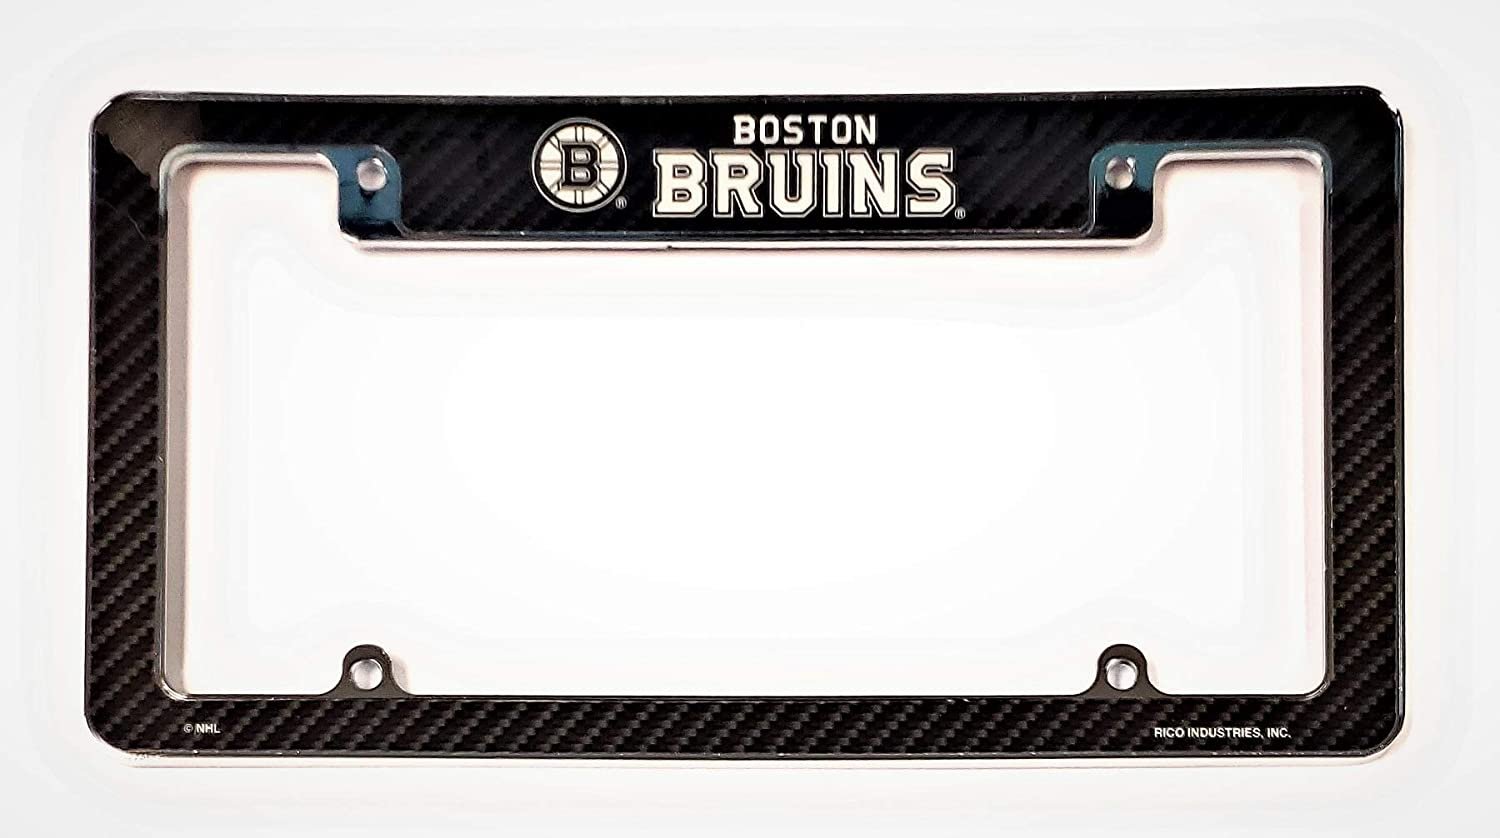 Boston Bruins Metal License Plate Frame Tag Cover, Carbon Fiber Design, EZ View Style, Heavy Duty, 12x6 Inch